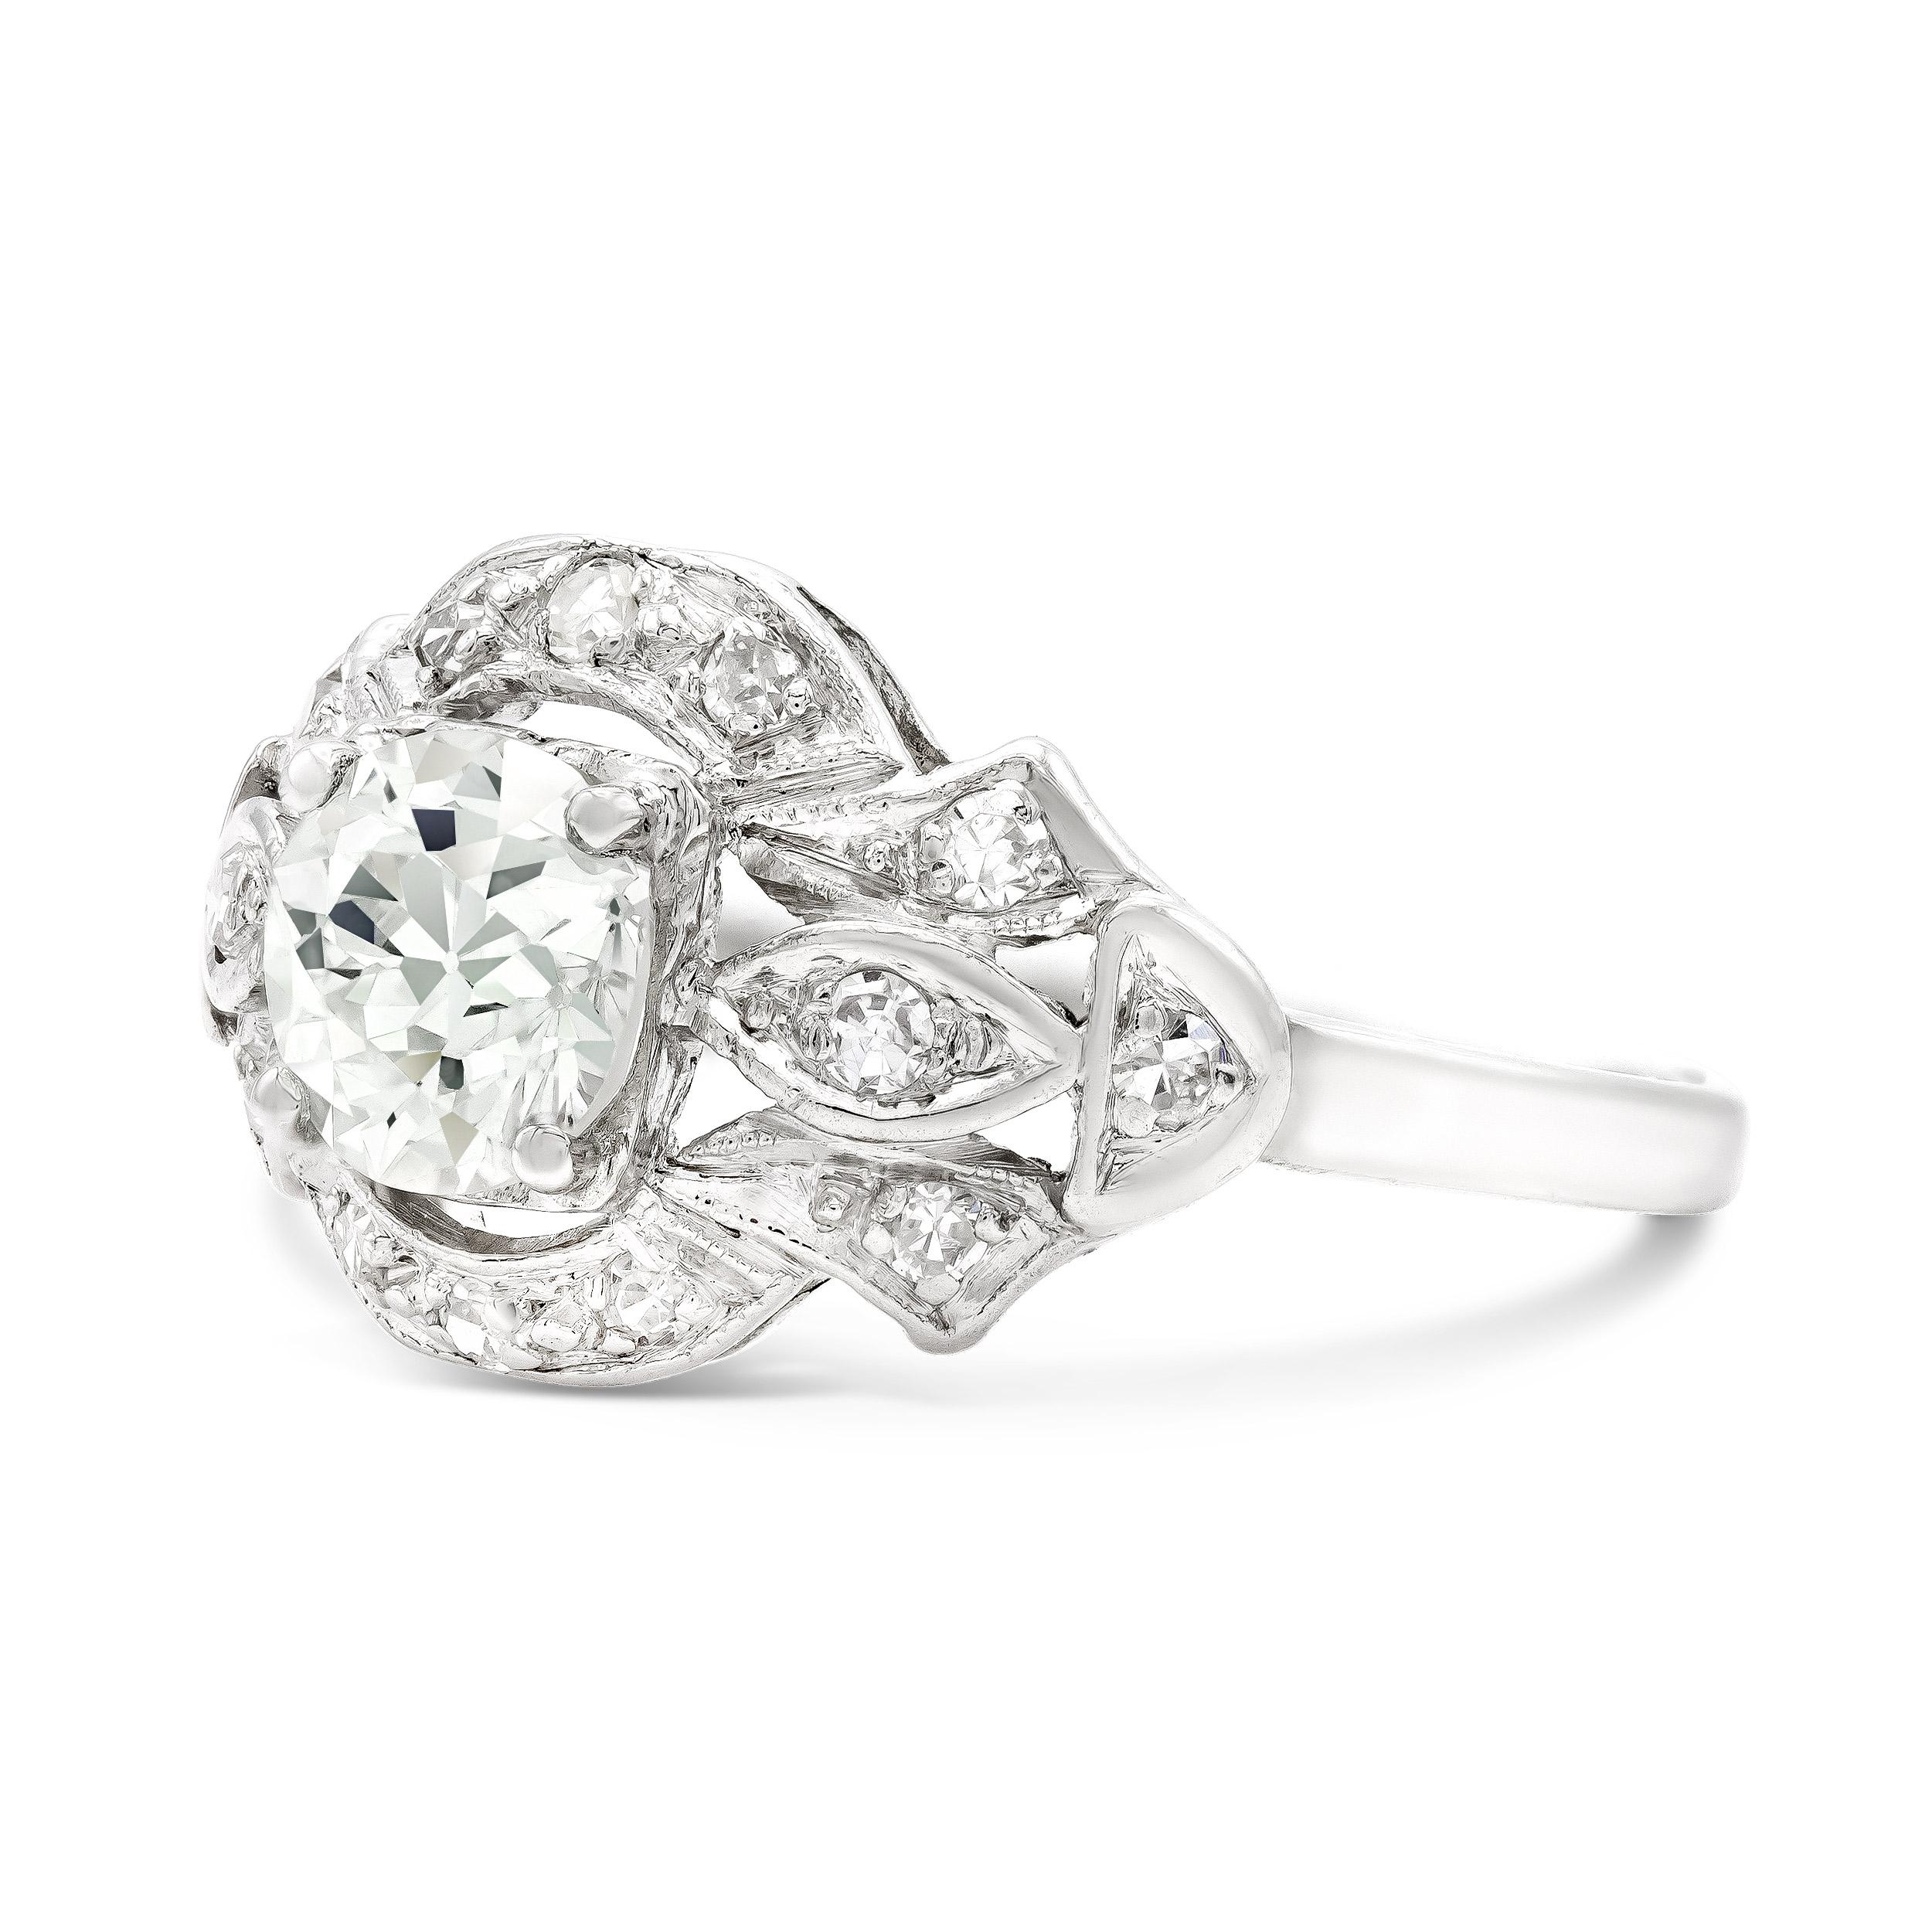 A decadently designed deco engagement ring that is both charming and bold. An irresistibly bright 0.79 carat old European cut diamond is the star of this show. We love her eye-catching facets. The diamond is wrapped up in some some single cut